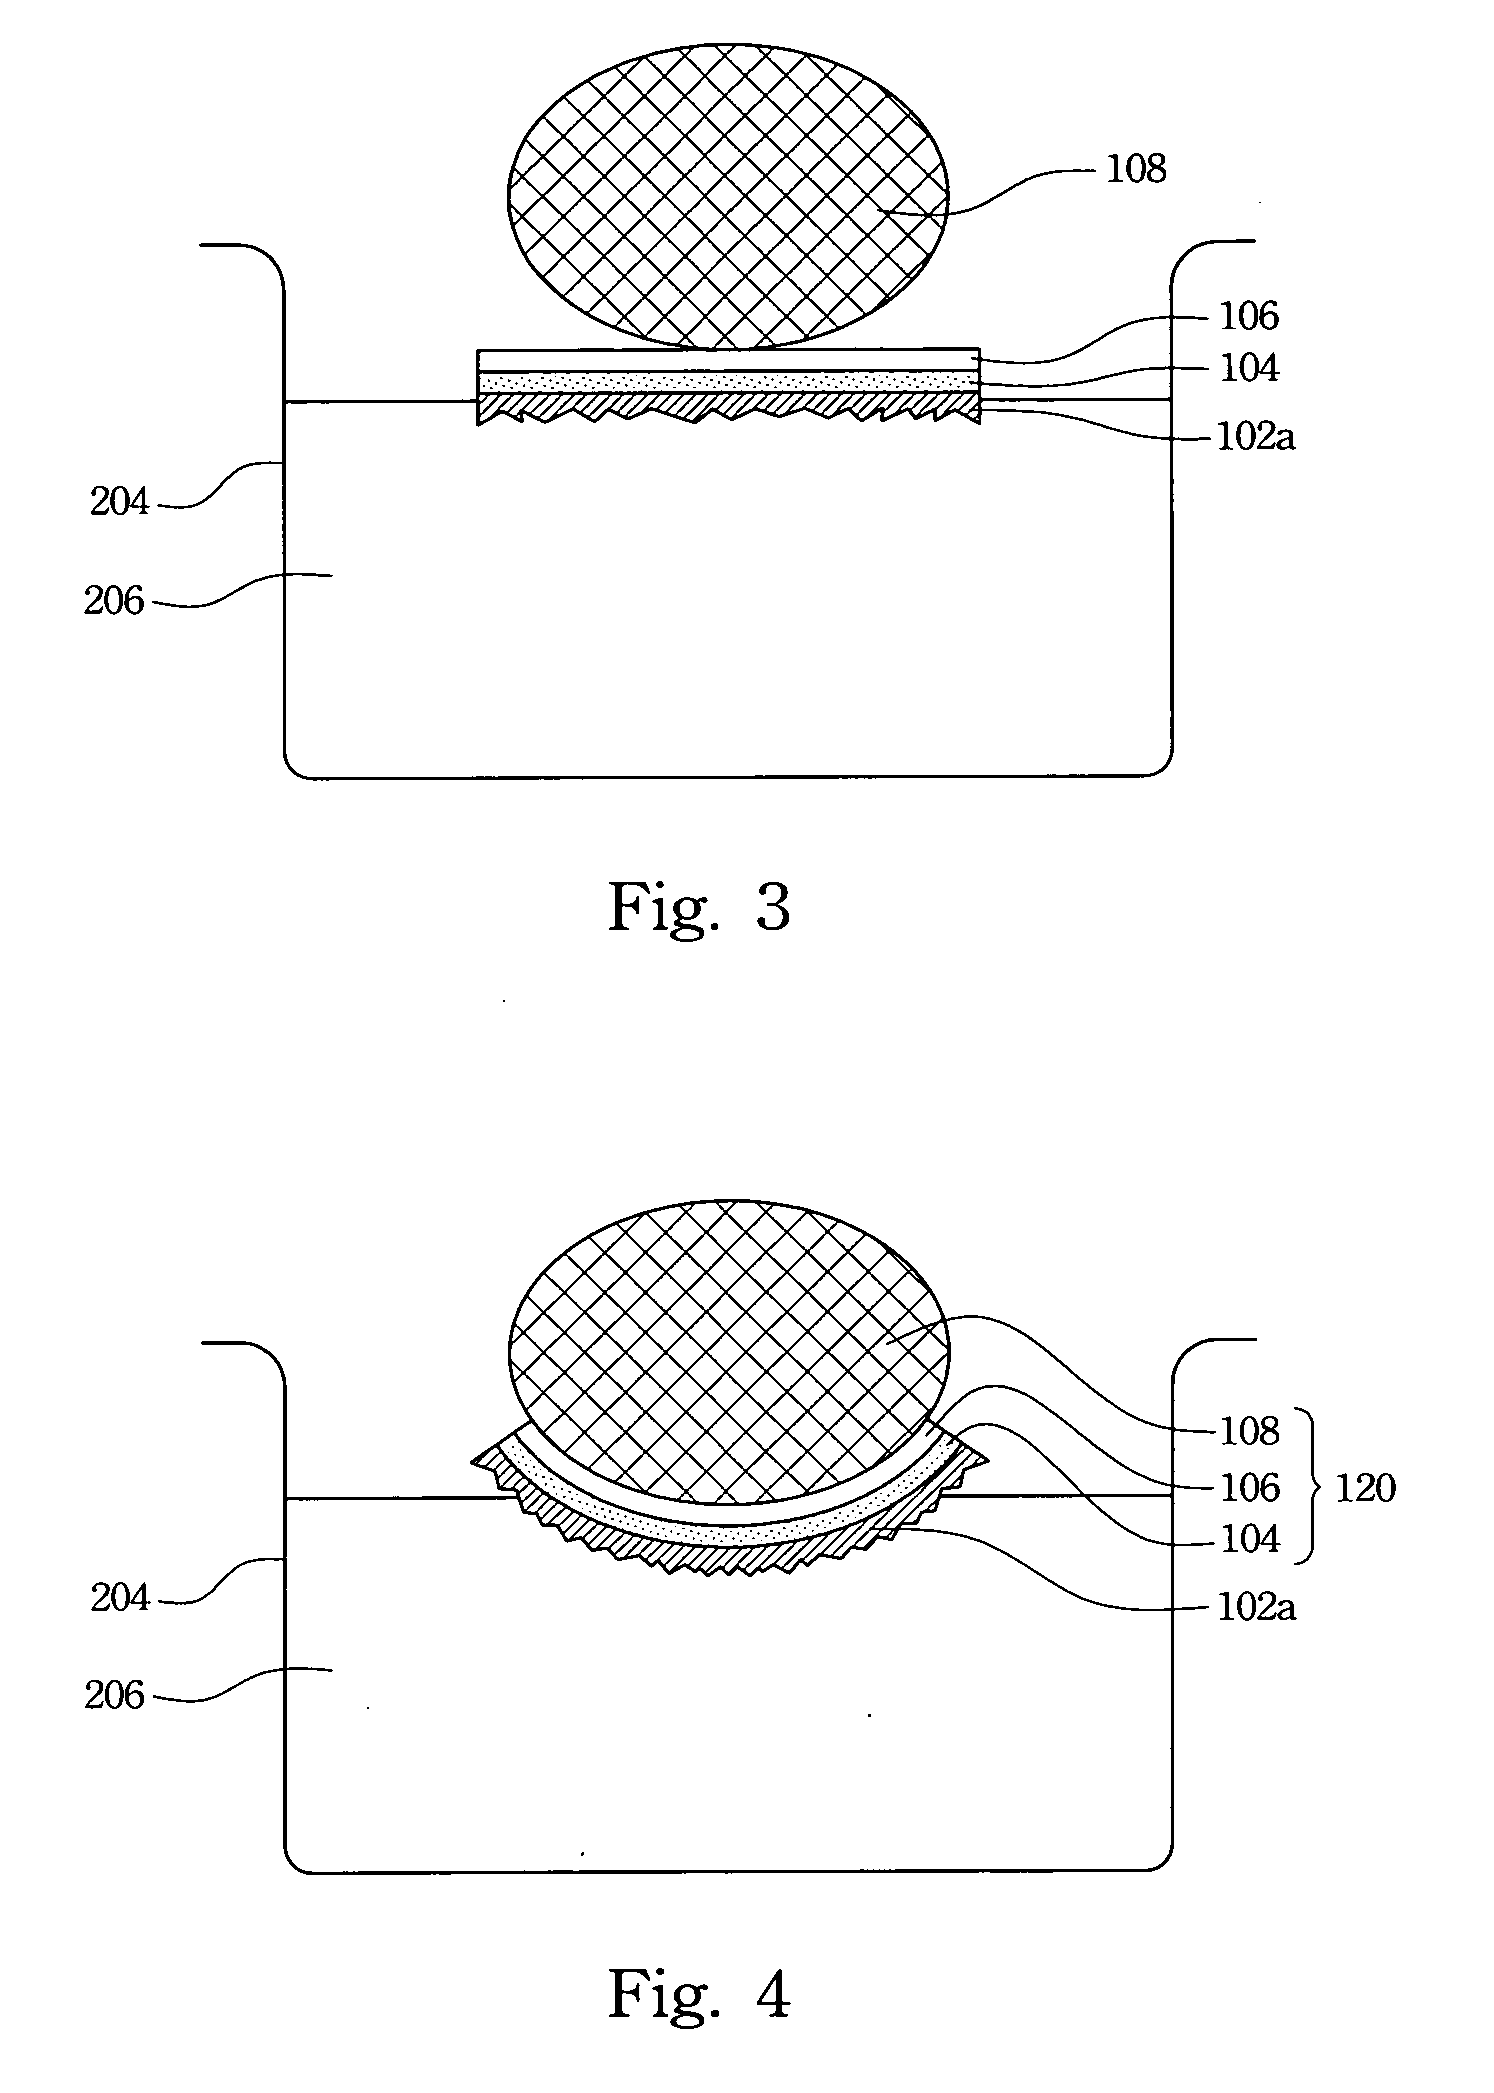 Method of fabricating an environmentally friendly cladding layer